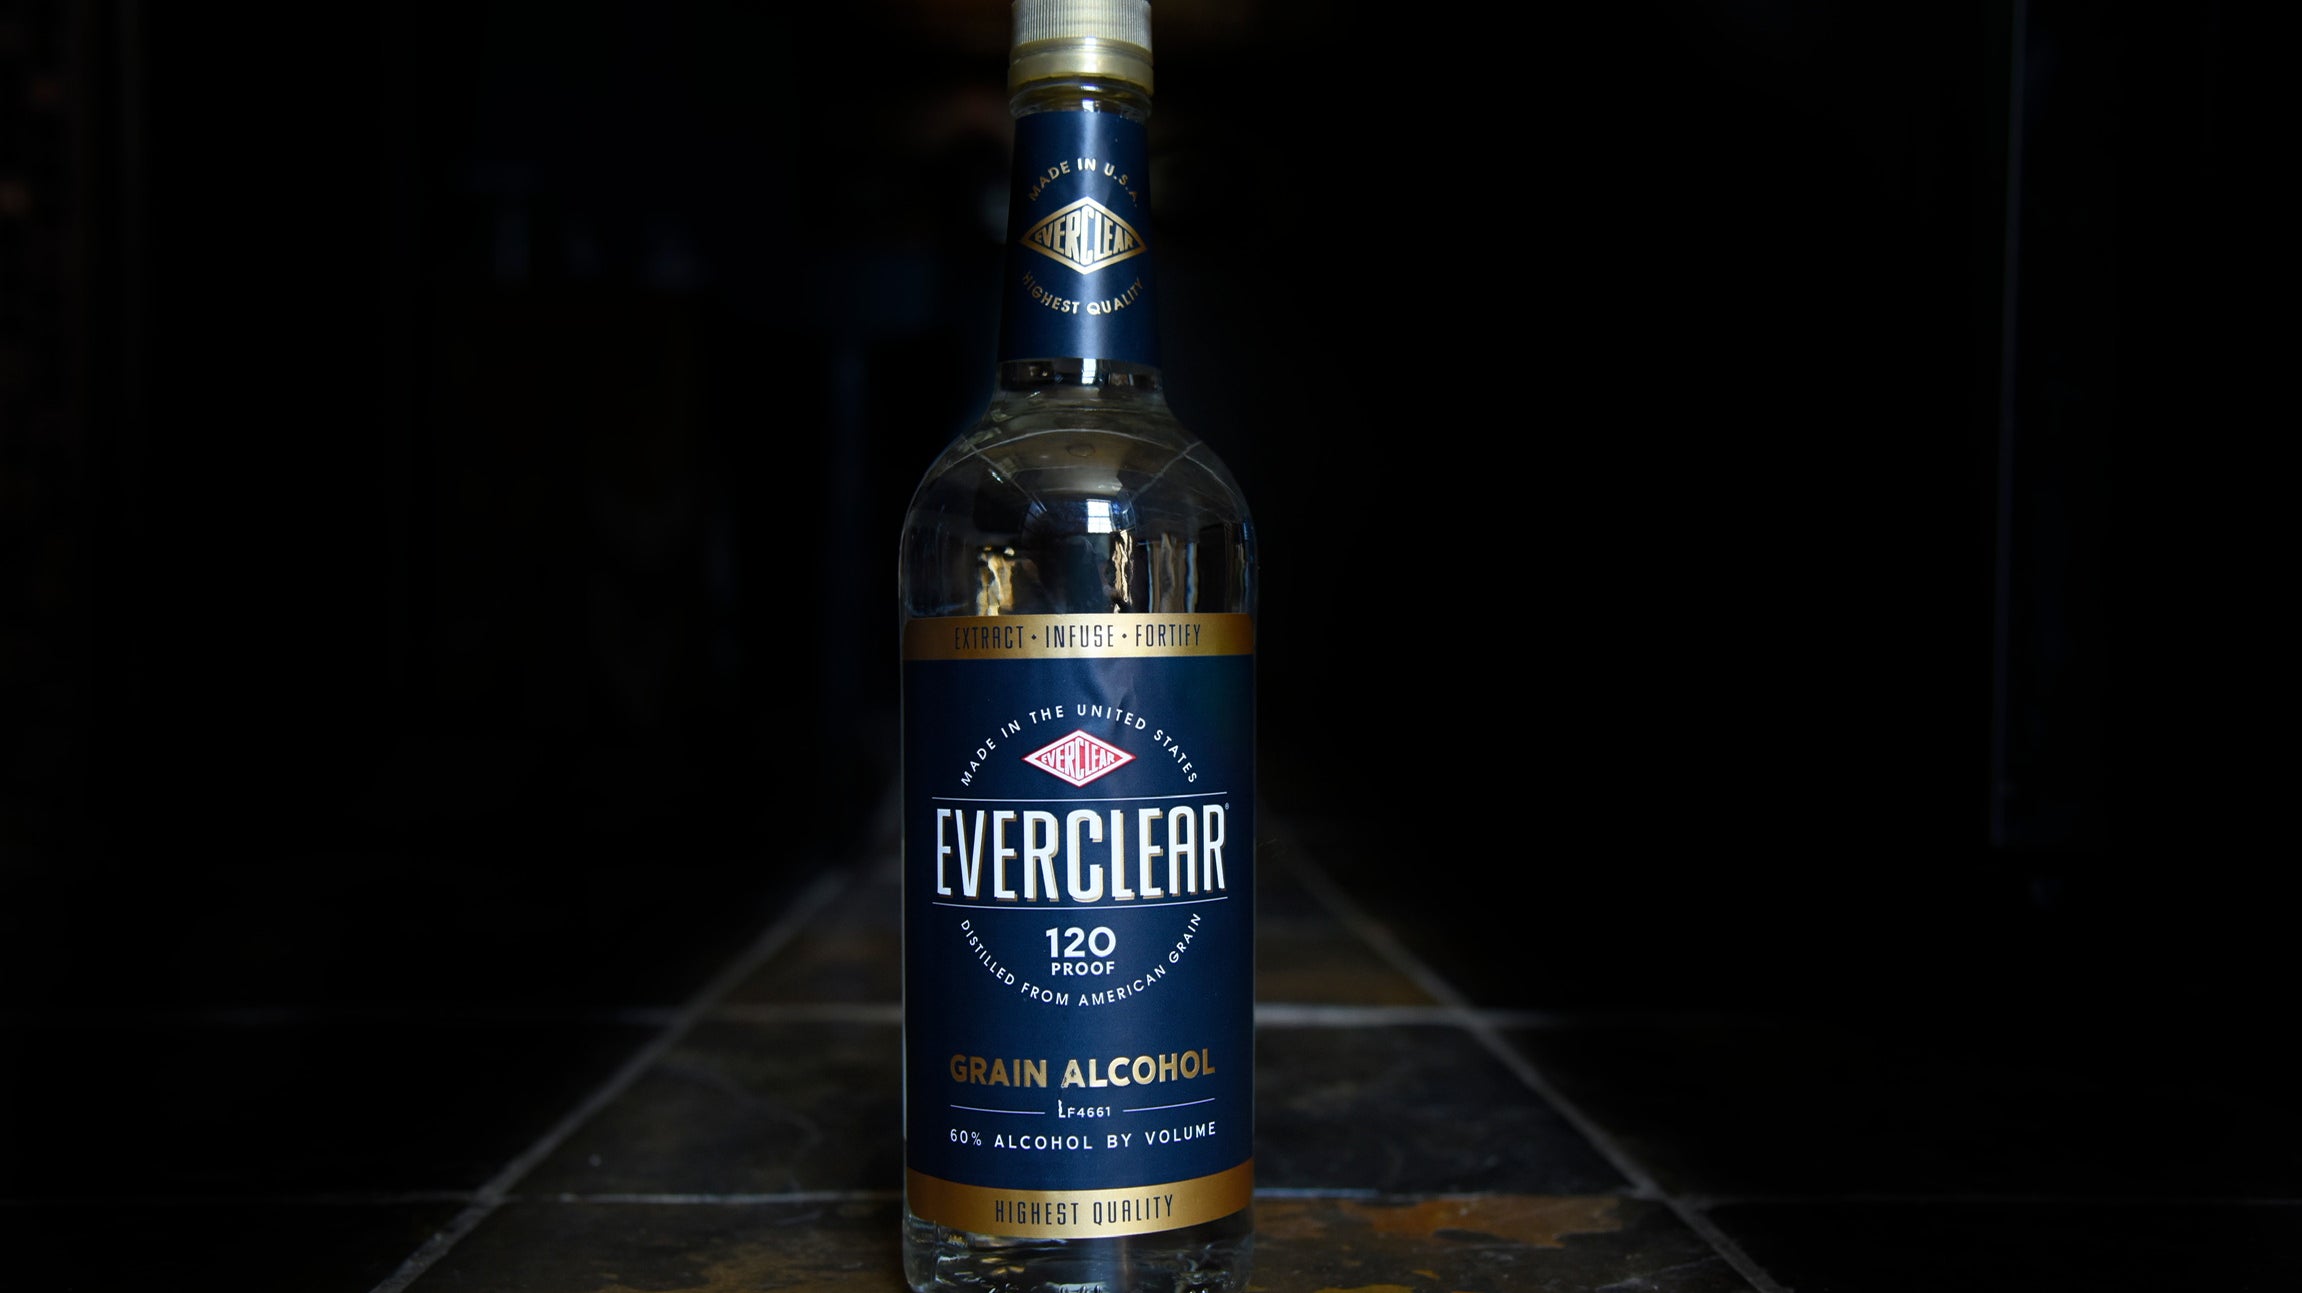 Using Everclear for Vanilla Extract